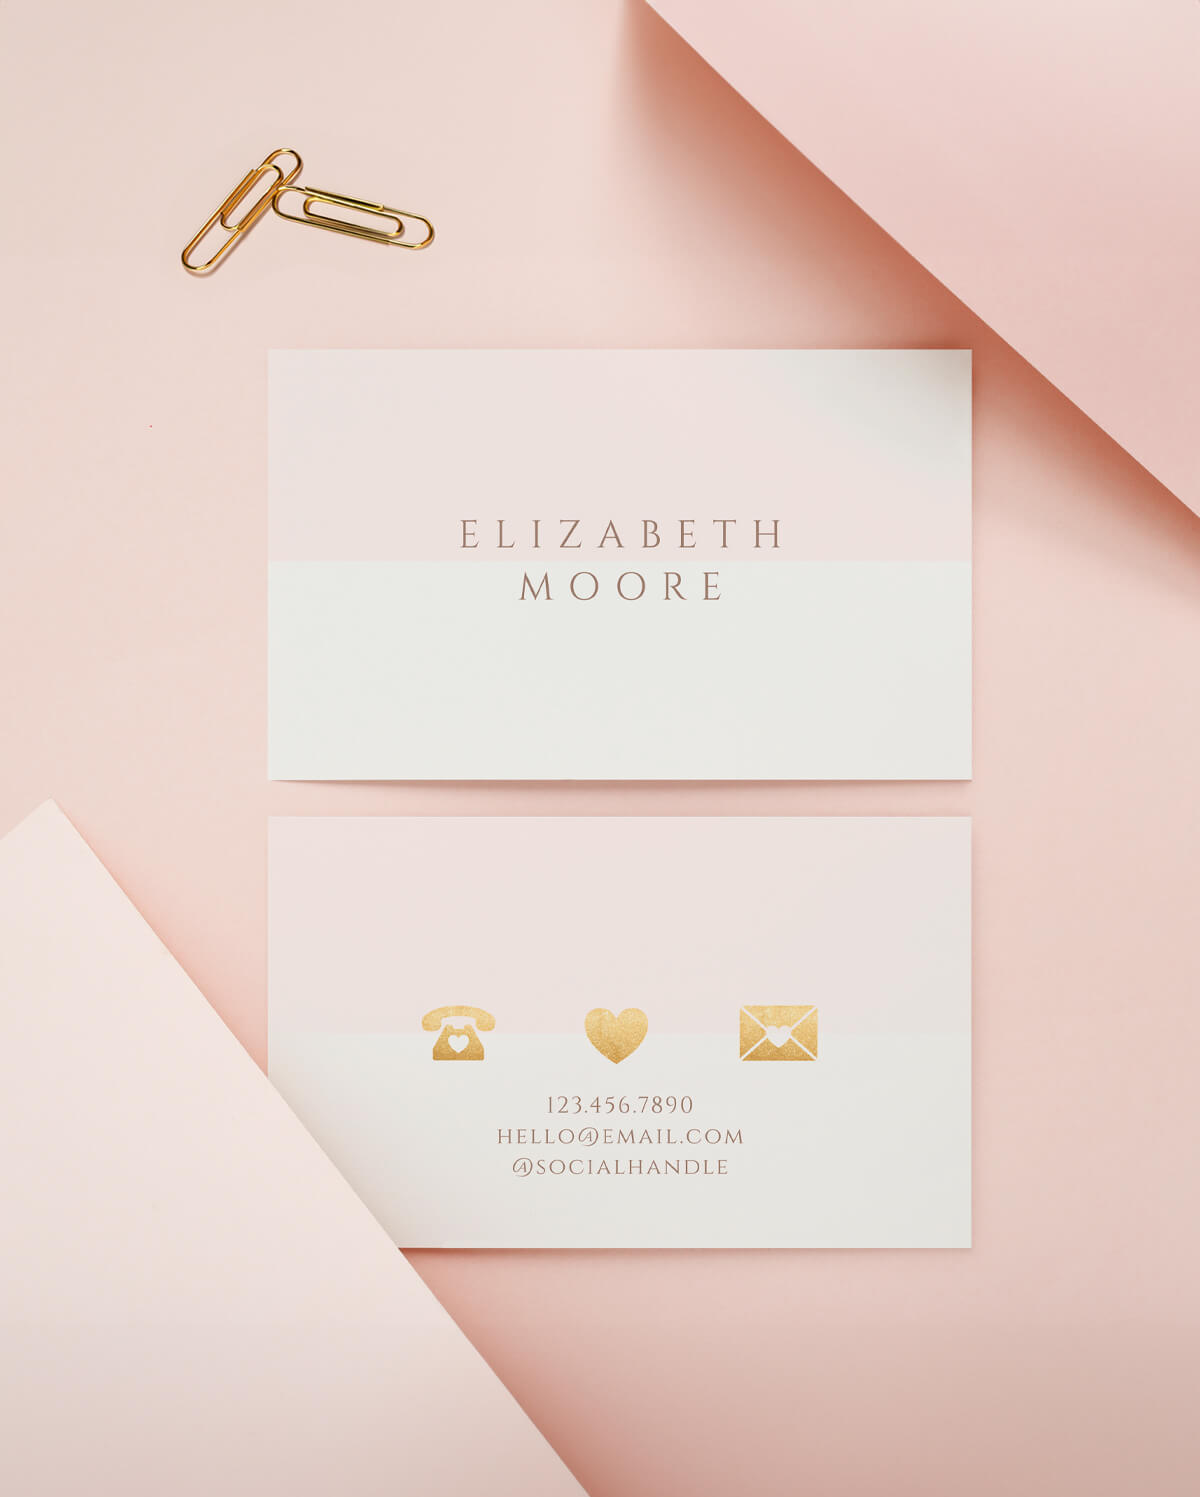 MODERN BUSINESS CARD DESIGNS FOR ANY PROFESSION